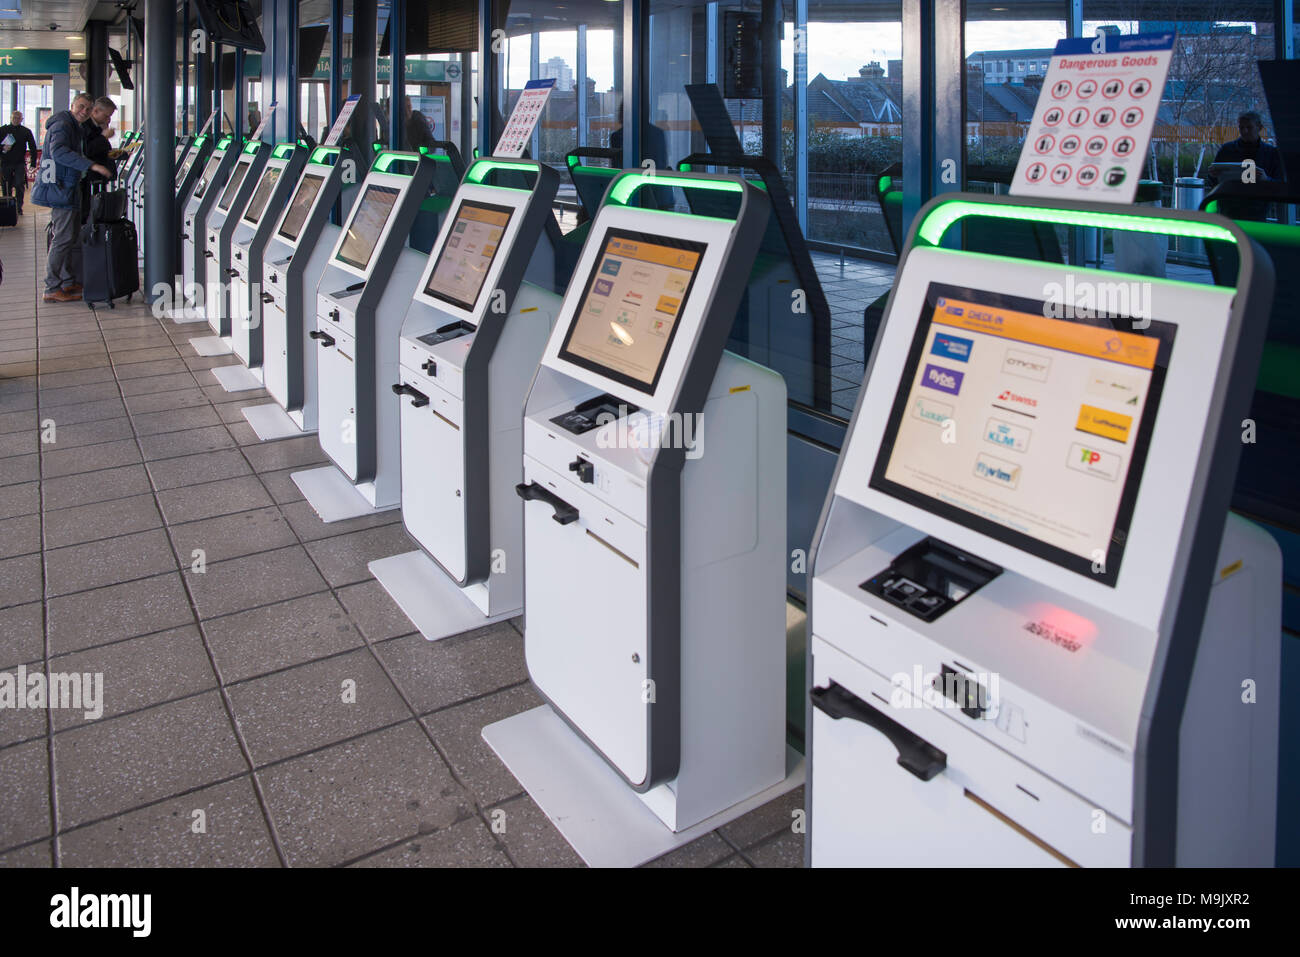 Self-service airline check-in desk boarding pass printers at London City Airport, England, United Kingdom Stock Photo